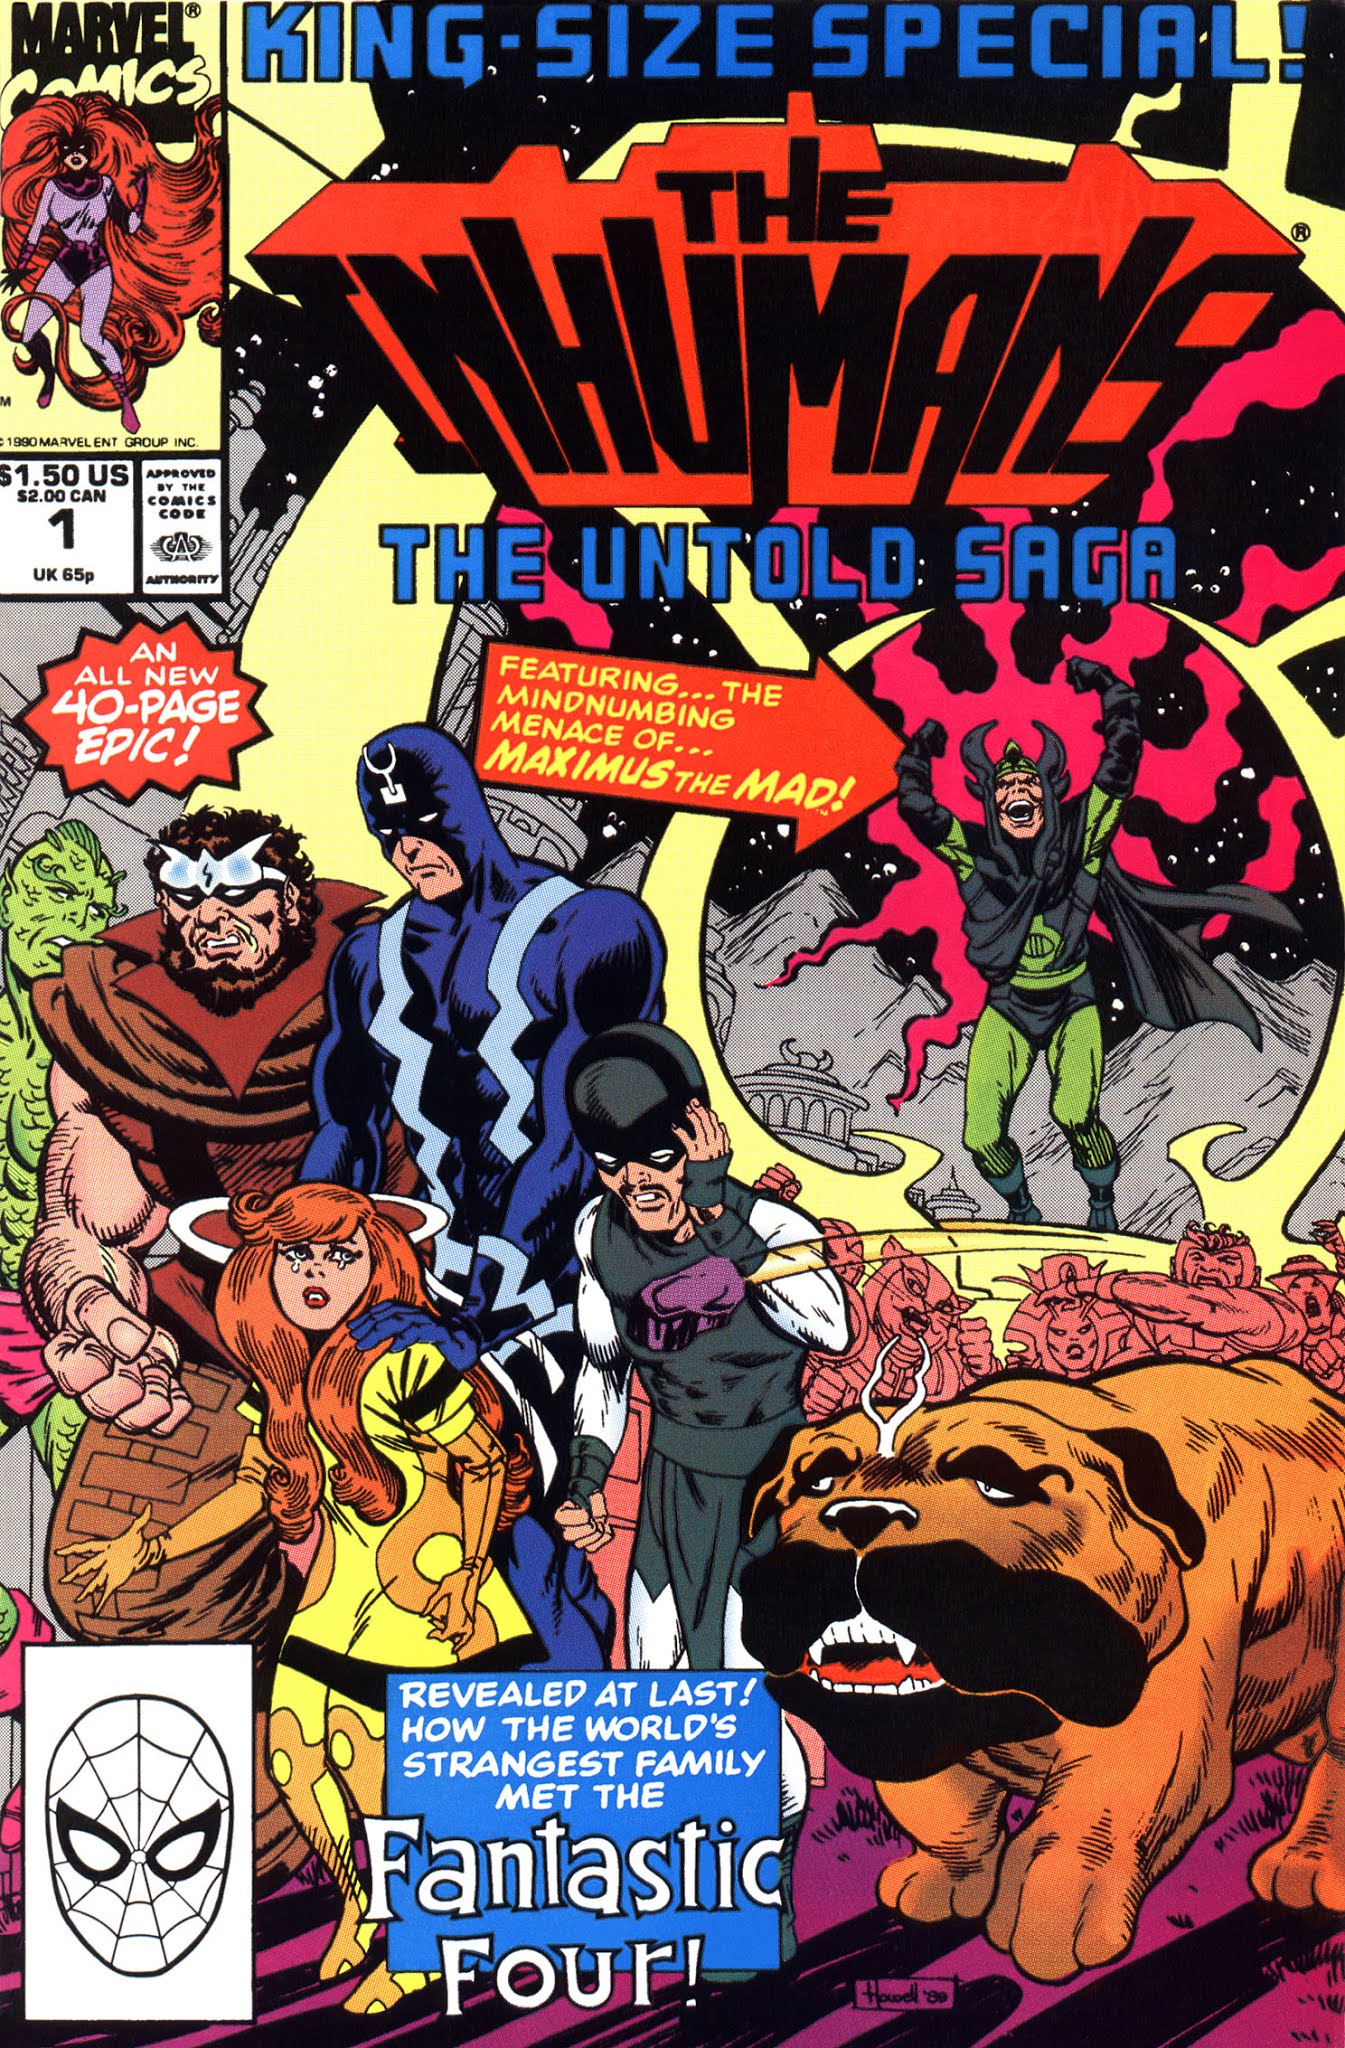 Read online Inhumans Special comic -  Issue # Full - 1